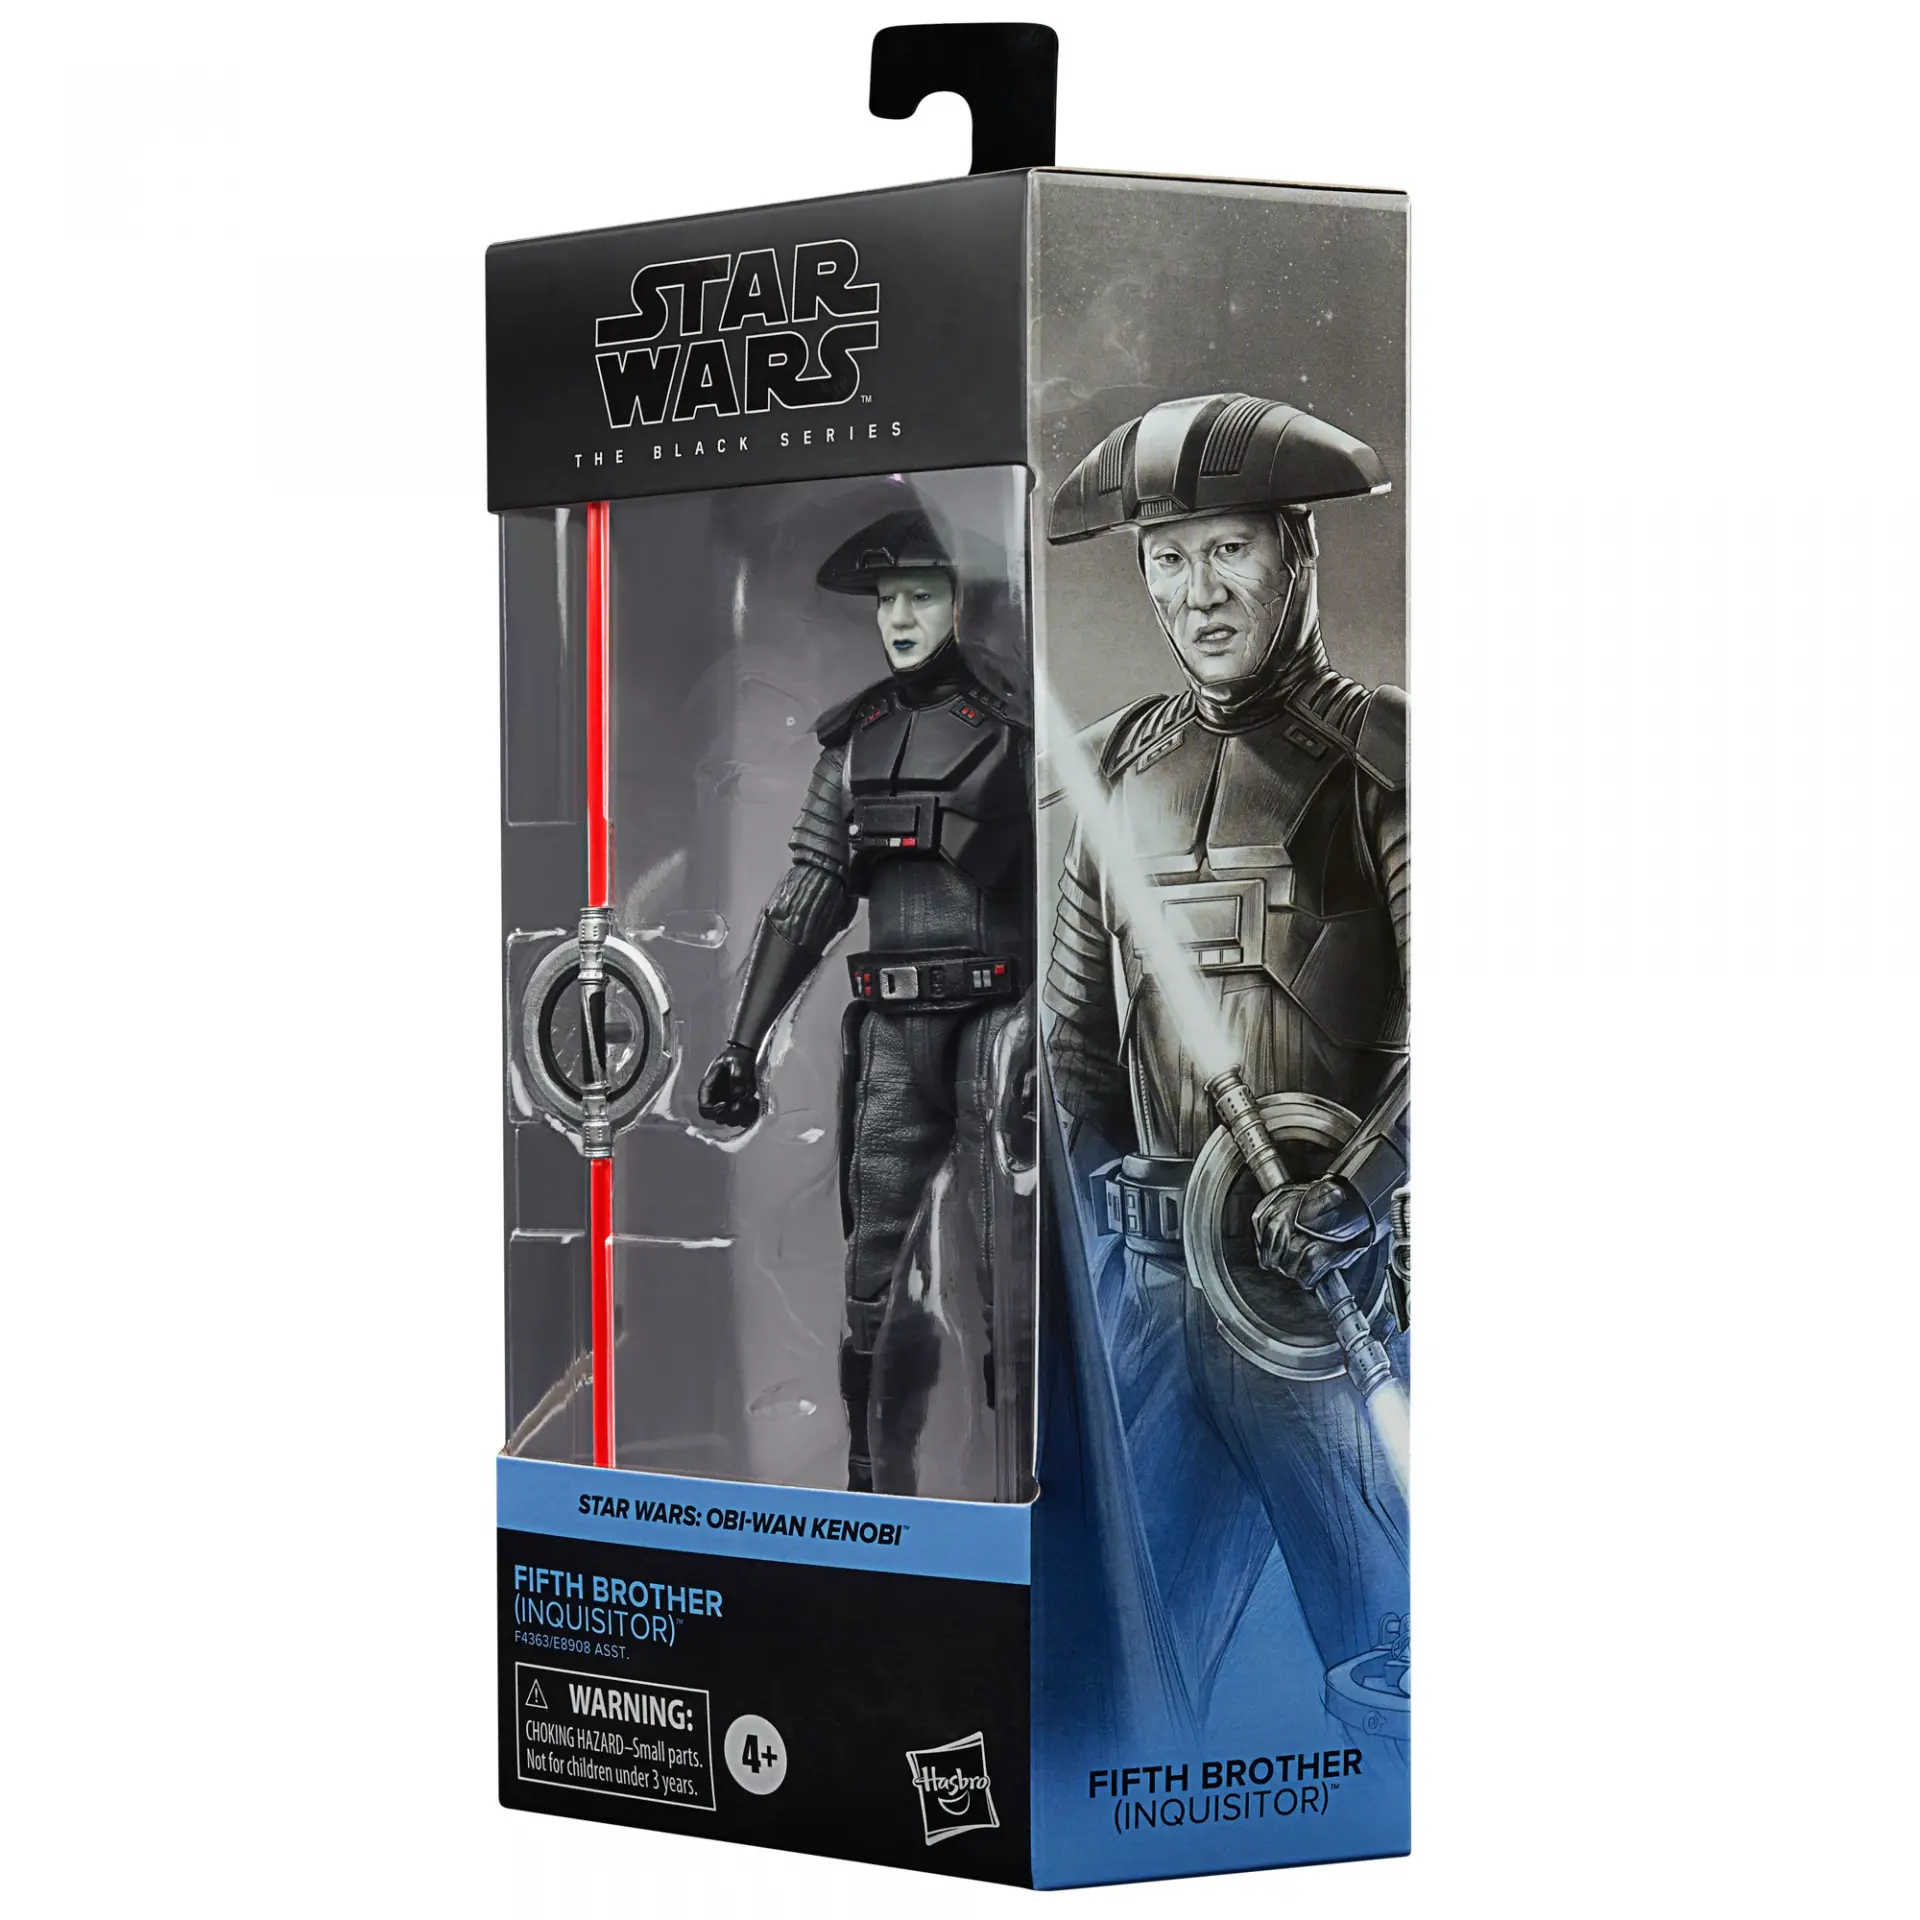 Star wars the black series fifth brother inquisitor jawascave 10